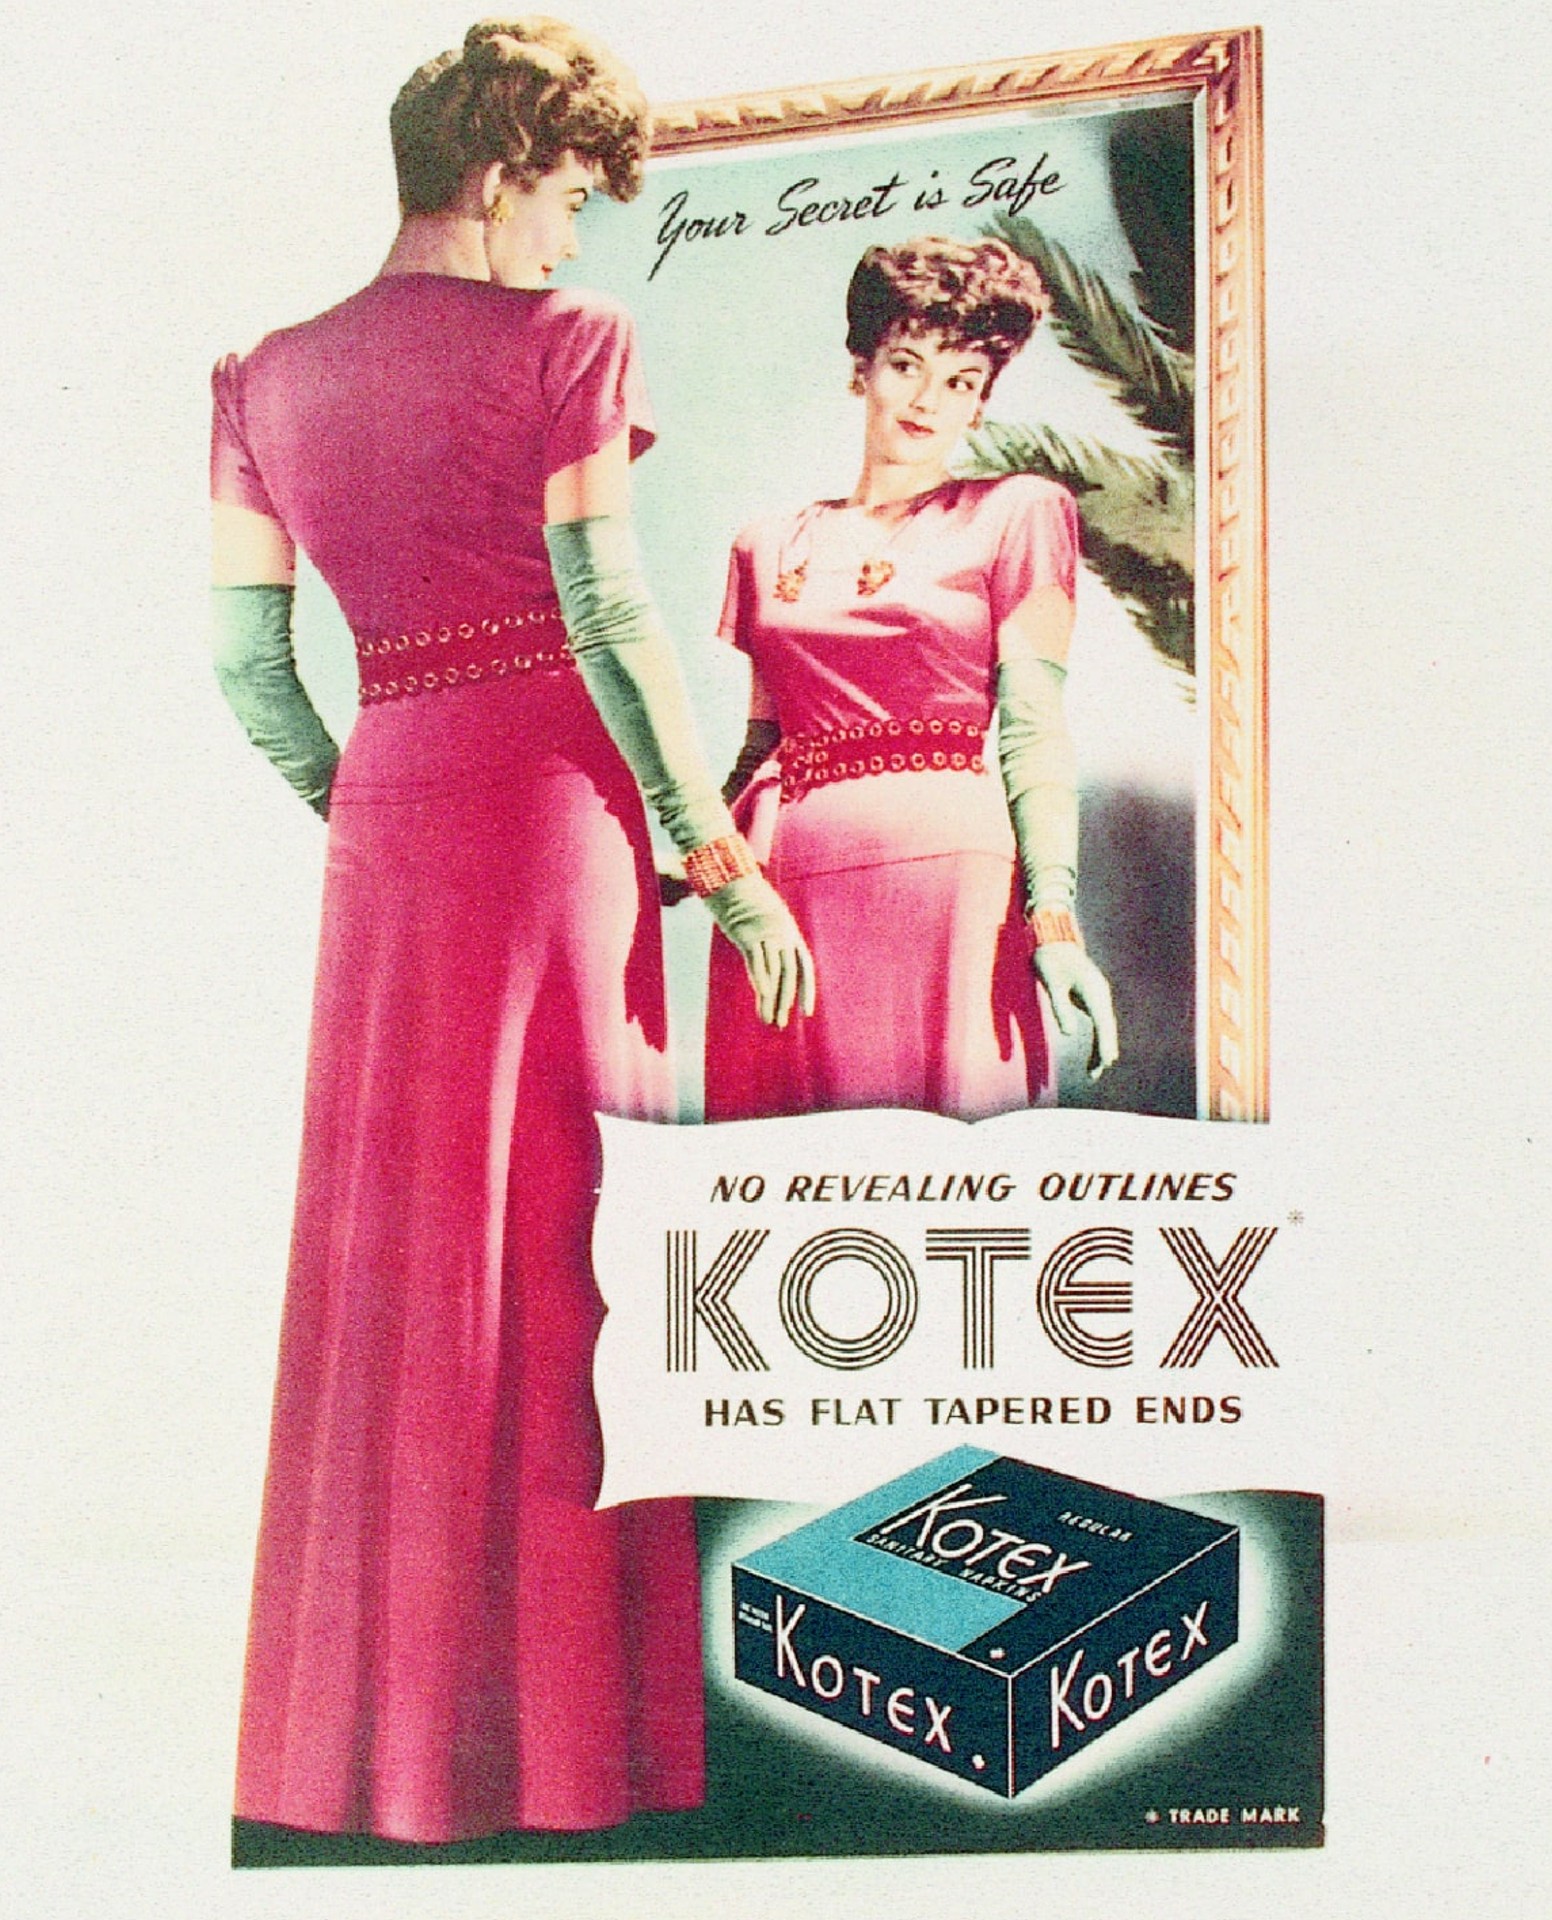 The launch of the Kotex brand in 1920 was a pivotal moment, as Kimberly-Clark launched the modern feminine hygiene category with new-to-the-world products that also brought the promise of new opportunities for women. However, the subject of menstruation led publications to refuse advertising for the brand, and drug stores would stock Kotex pads out of sight. Today, the brand continues to work around the world to promote menstrual hygiene education, tackle social stigmas, and improve access to these essential products.